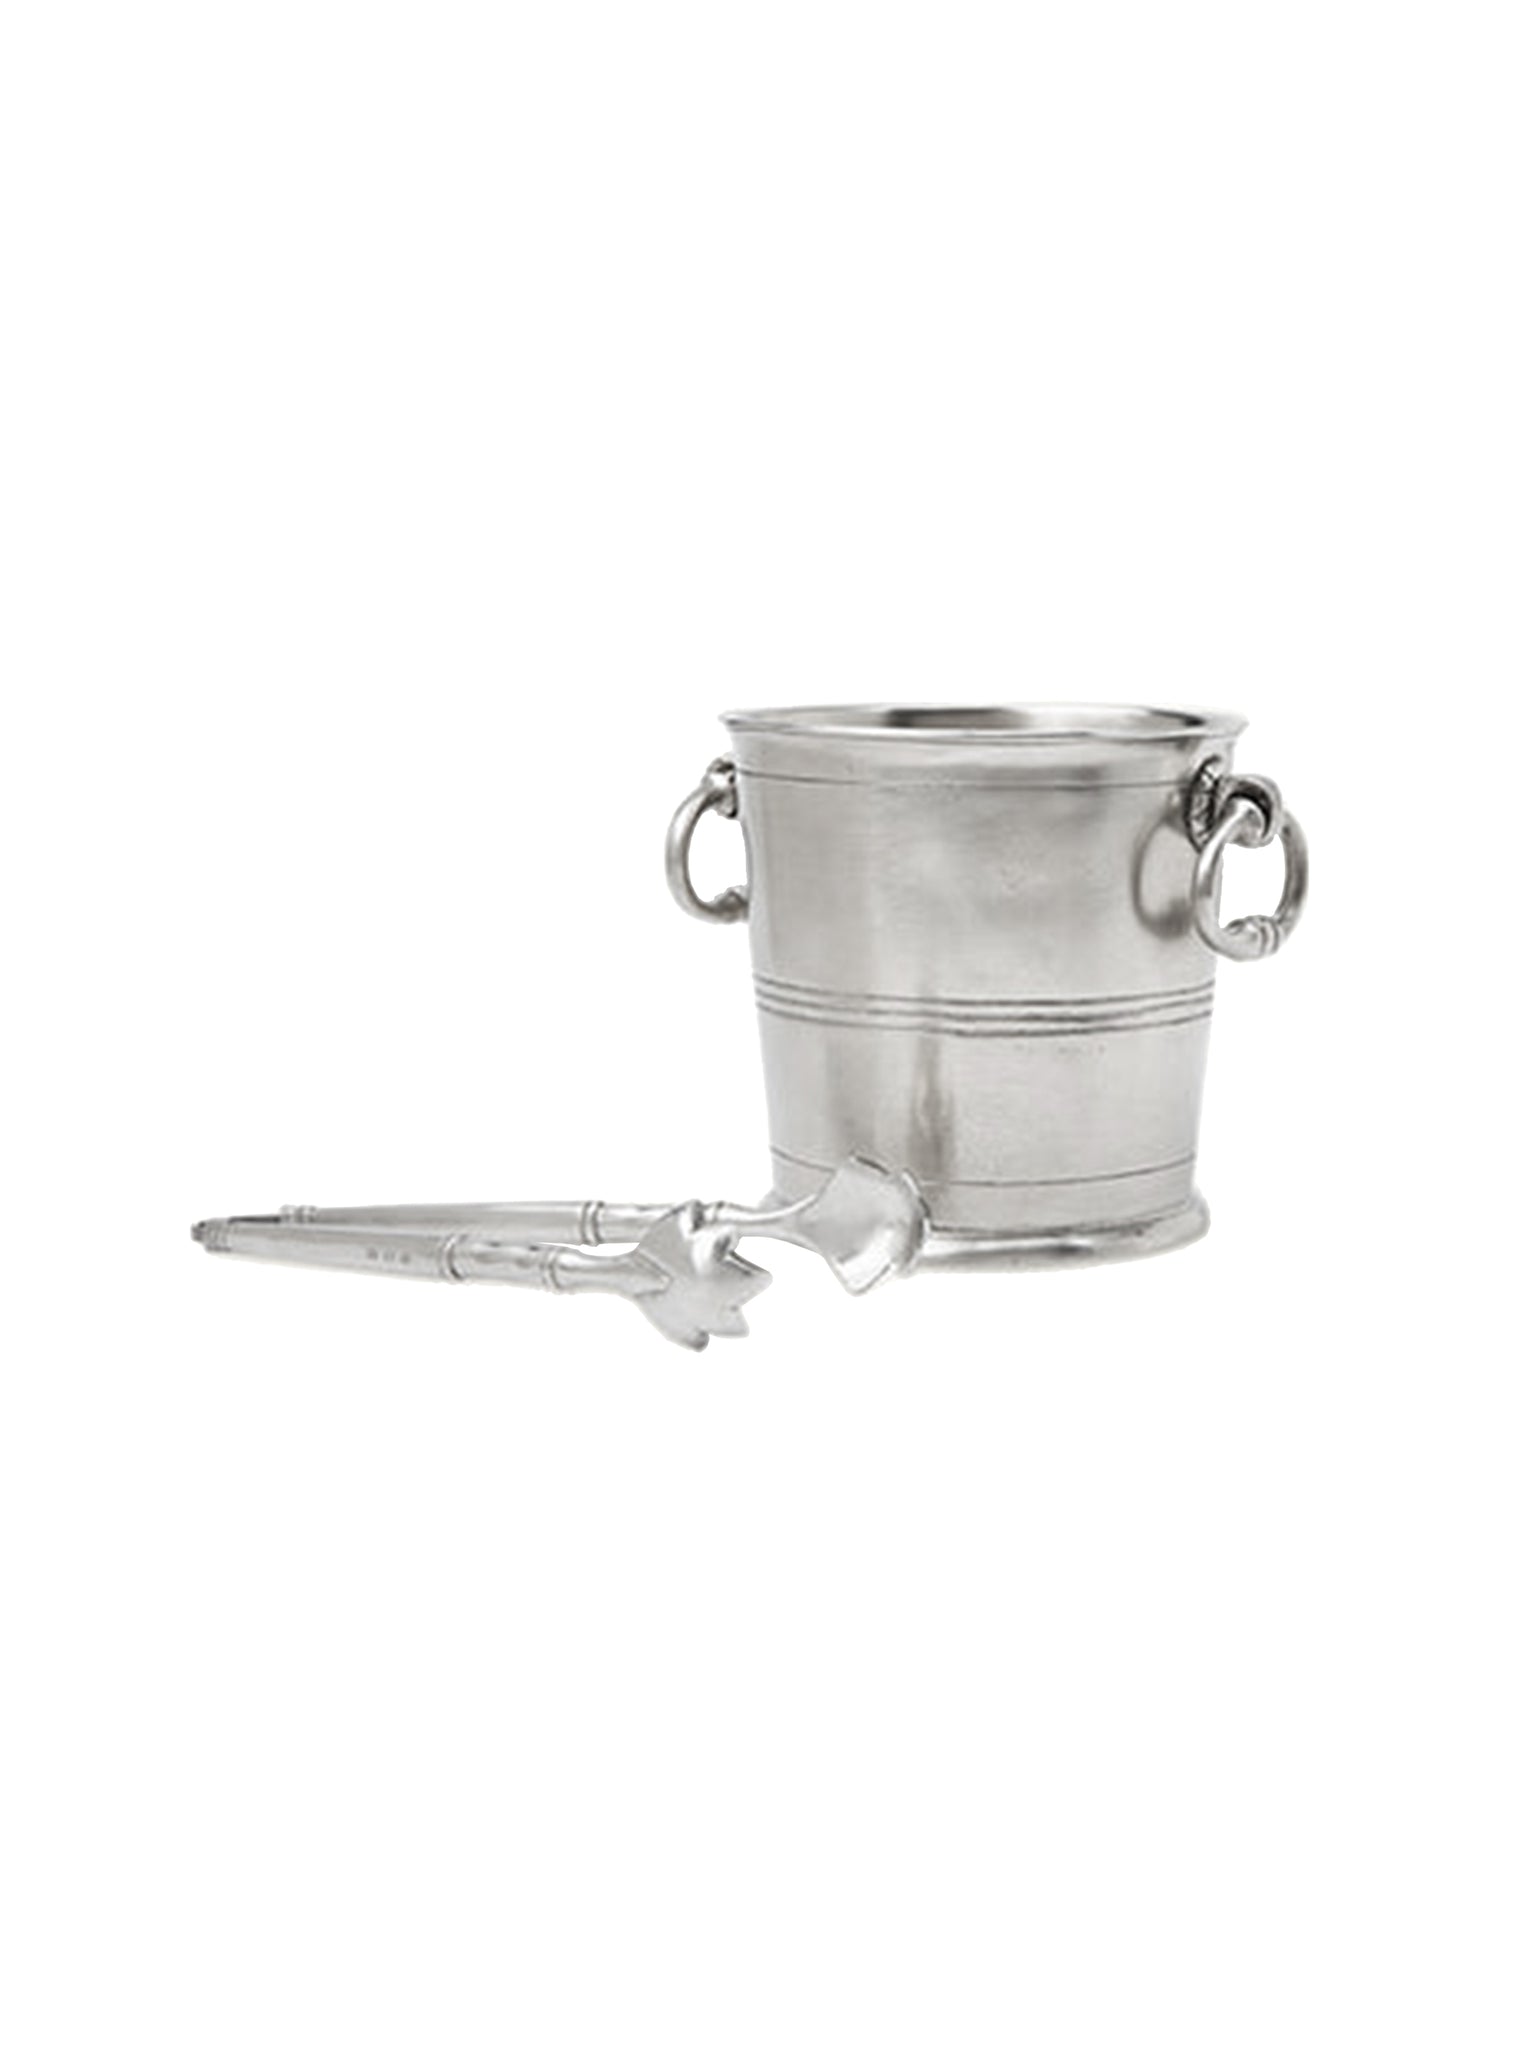 MATCH Pewter Ice Bucket with Rings with Tongs Set Weston Table